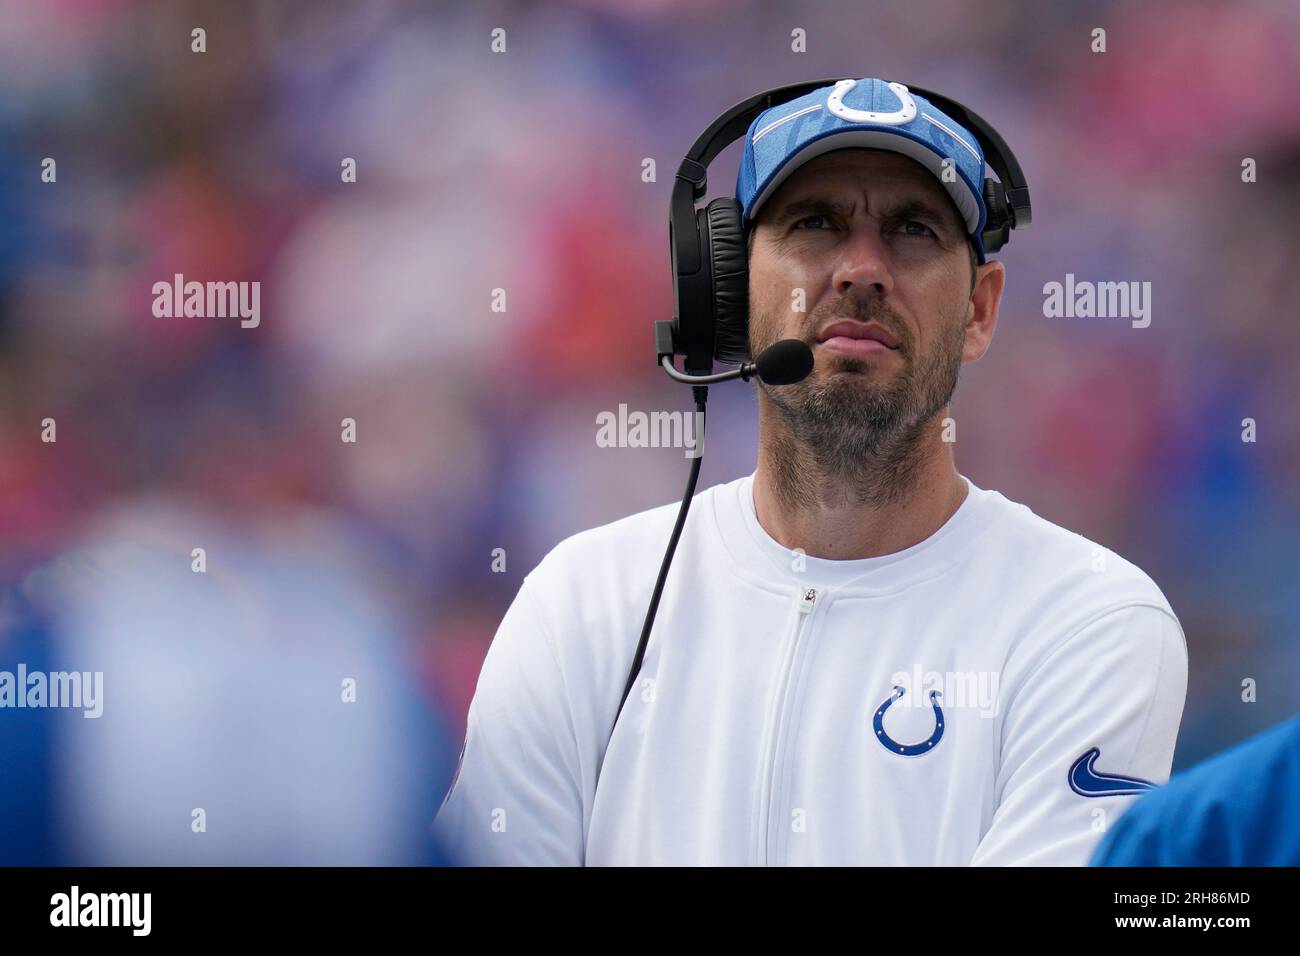 Head coach Shane Steichen wired for sound at Indianapolis Colts